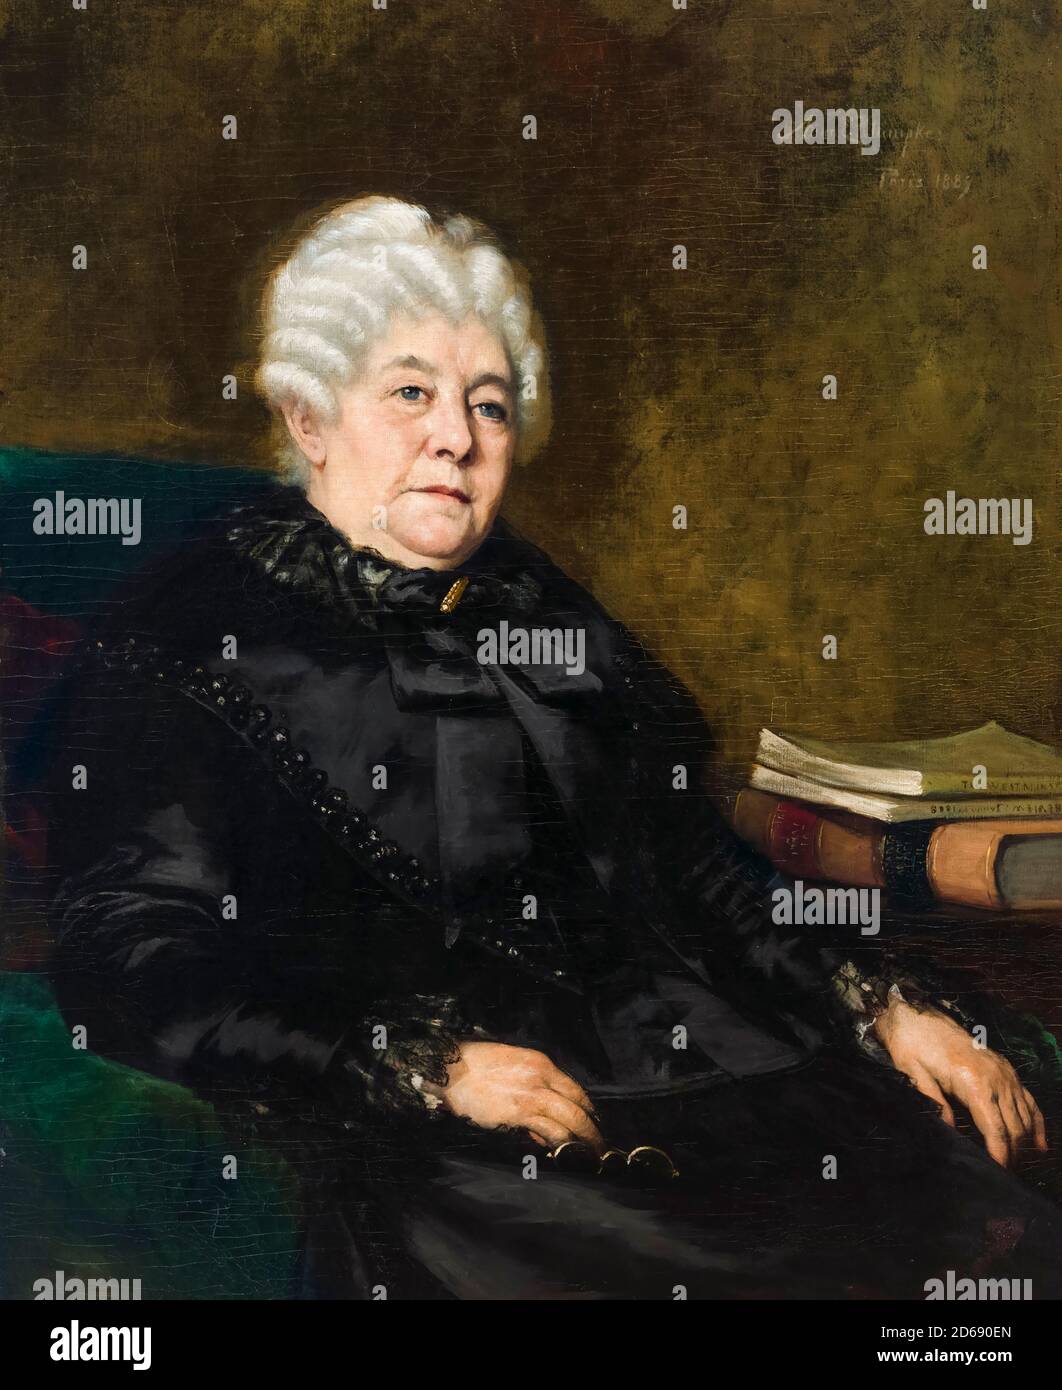 Elizabeth Cady Stanton (1815-1902), American leader of the women's rights movement, portrait painting by Anna Elizabeth Klumpke, 1889 Stock Photo